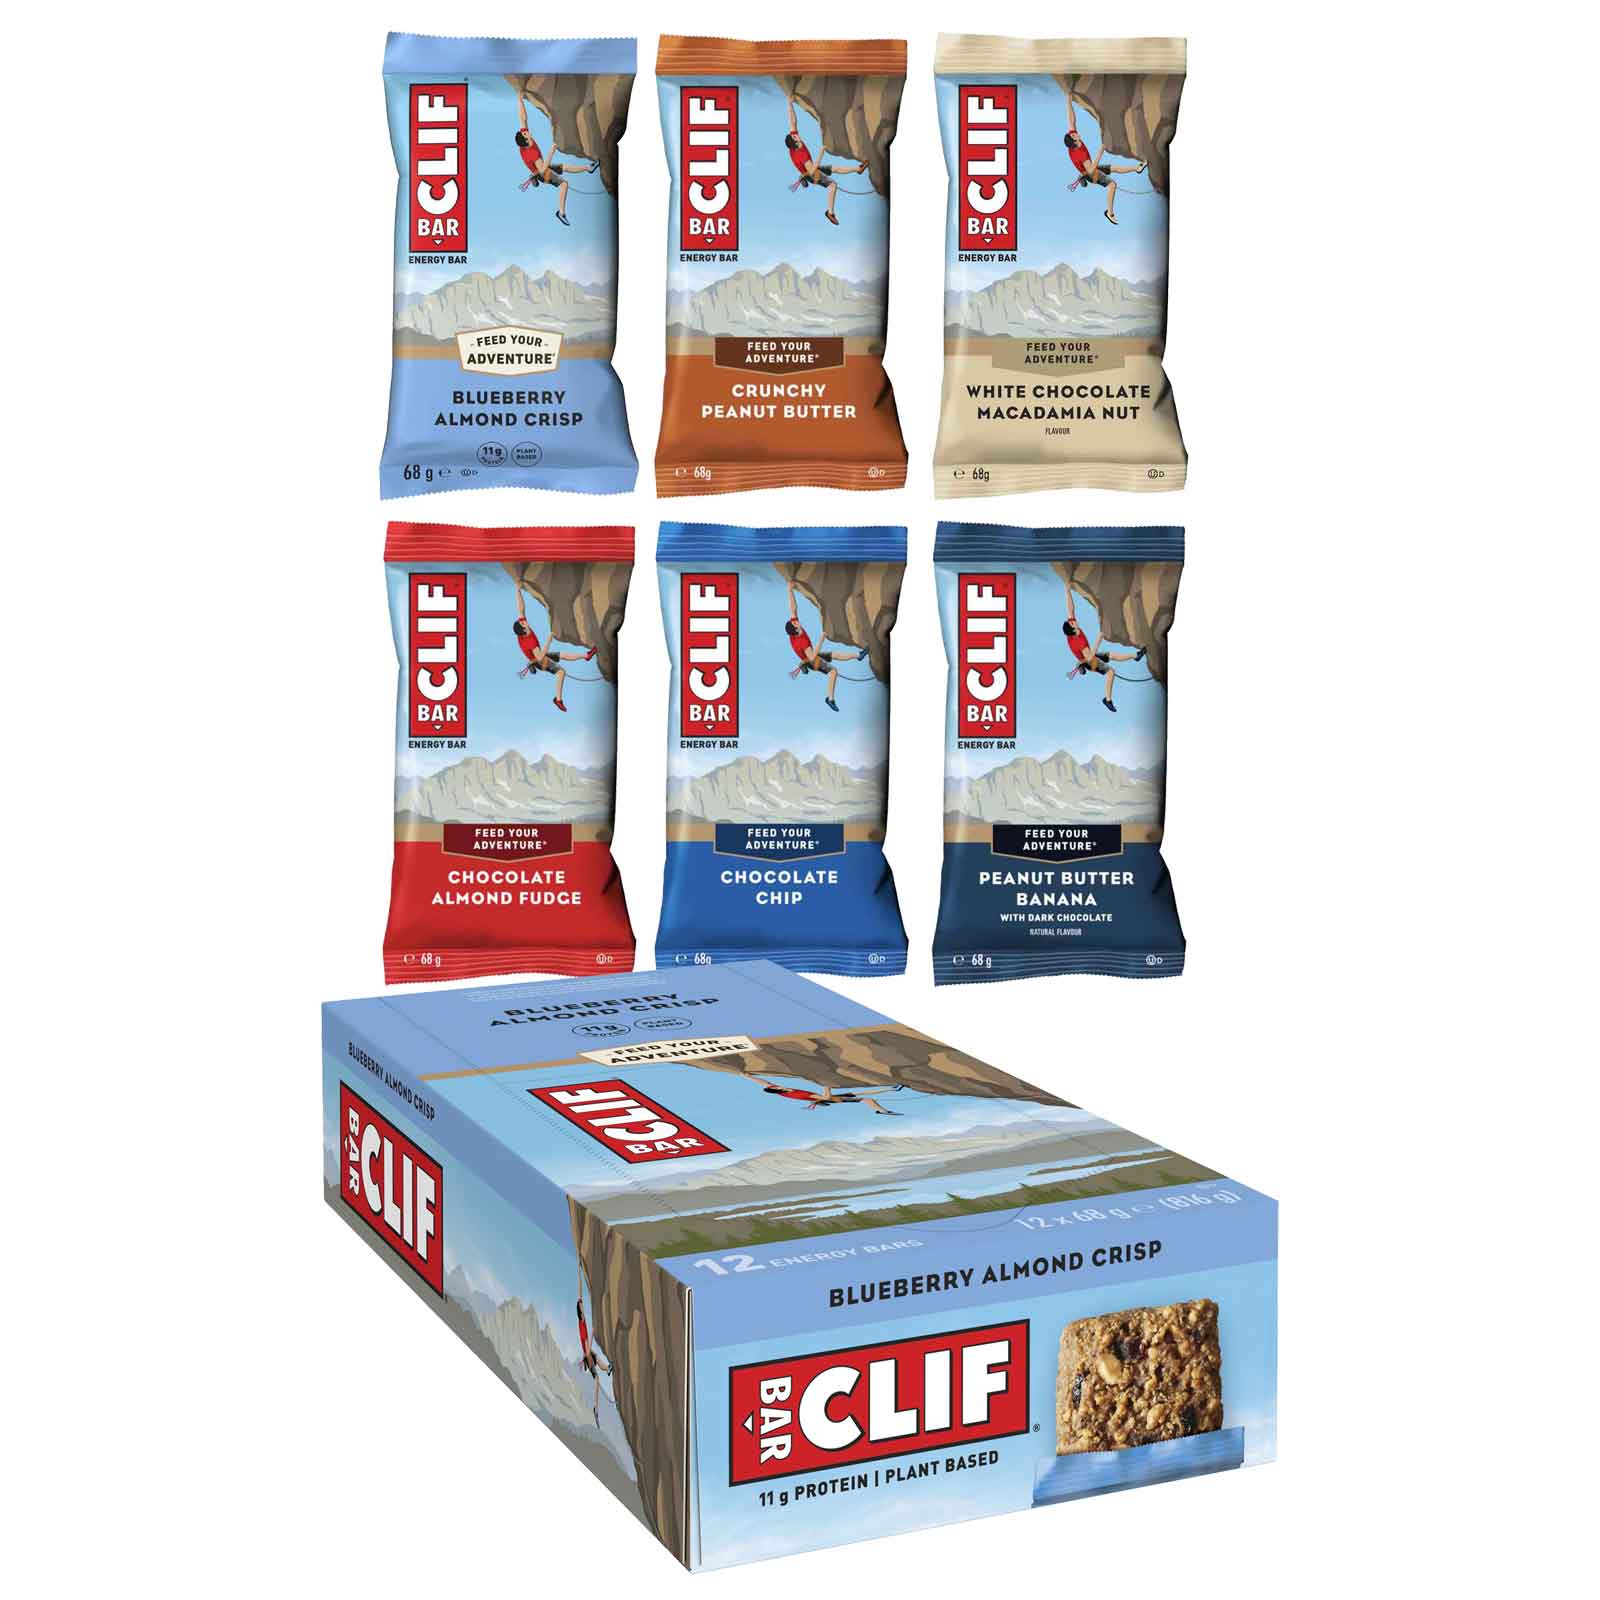 Productfoto van Clif Bar The Original Energy Bar - Carbohydrate-Protein-Bar - 12x68g